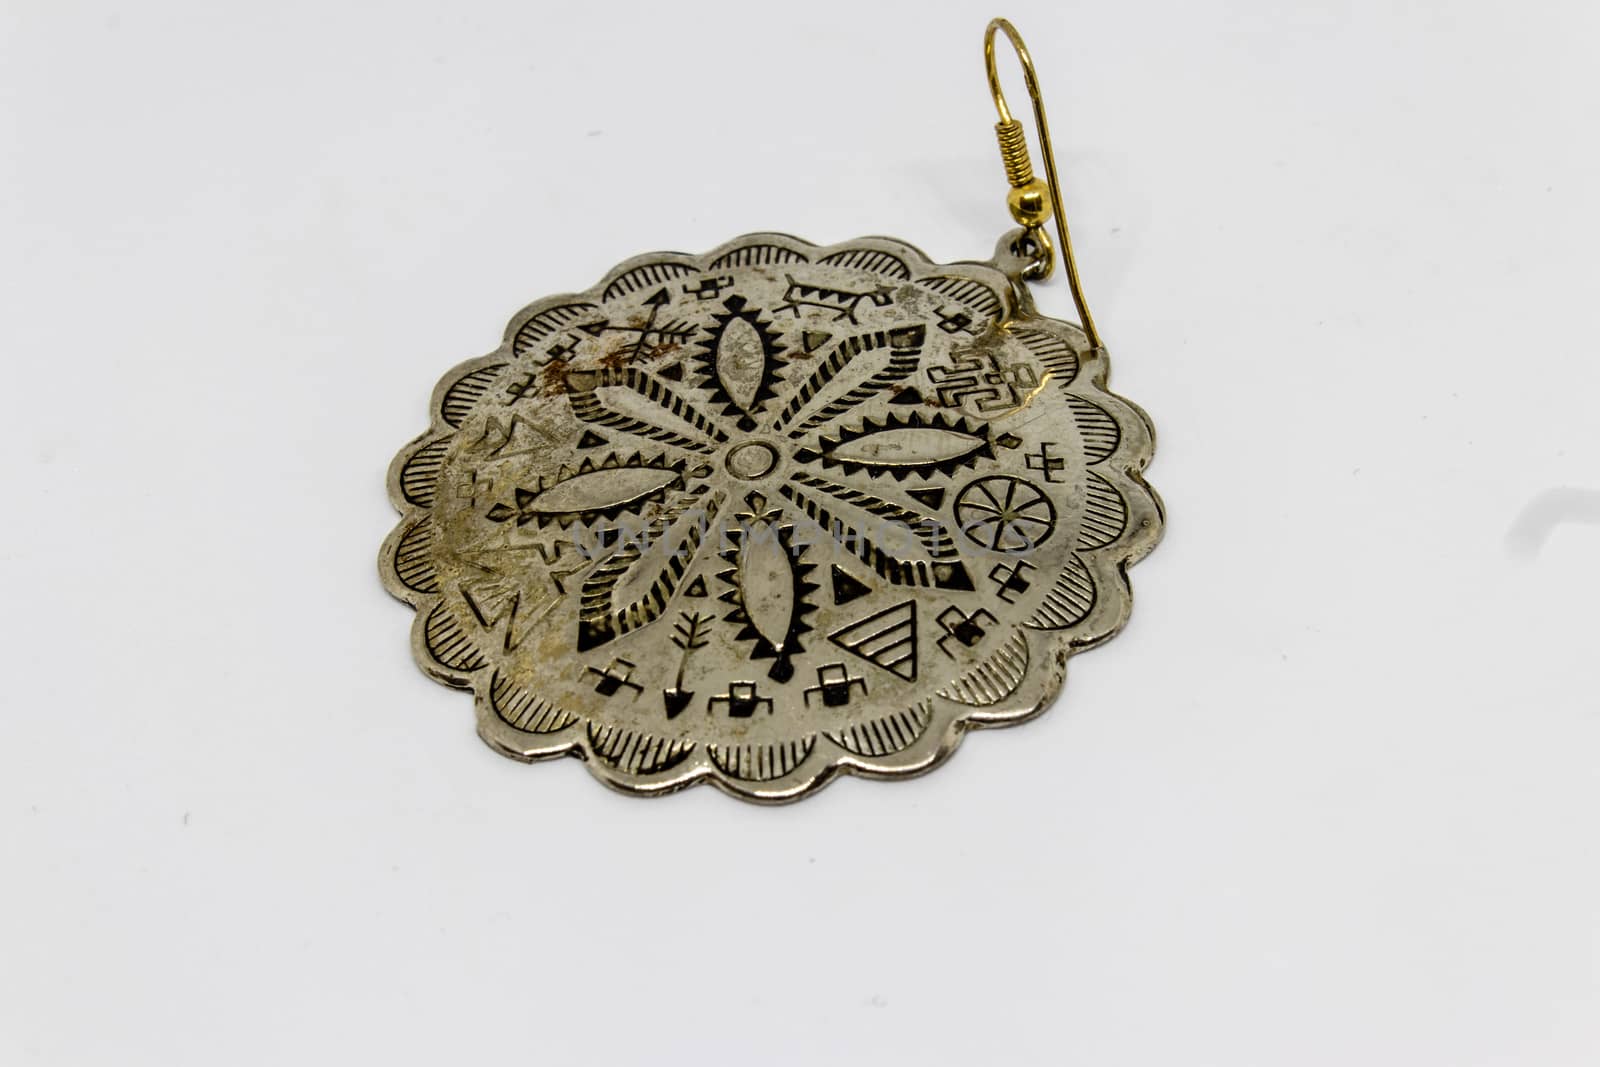 a good looking old silver badge with flower pattern with white background.